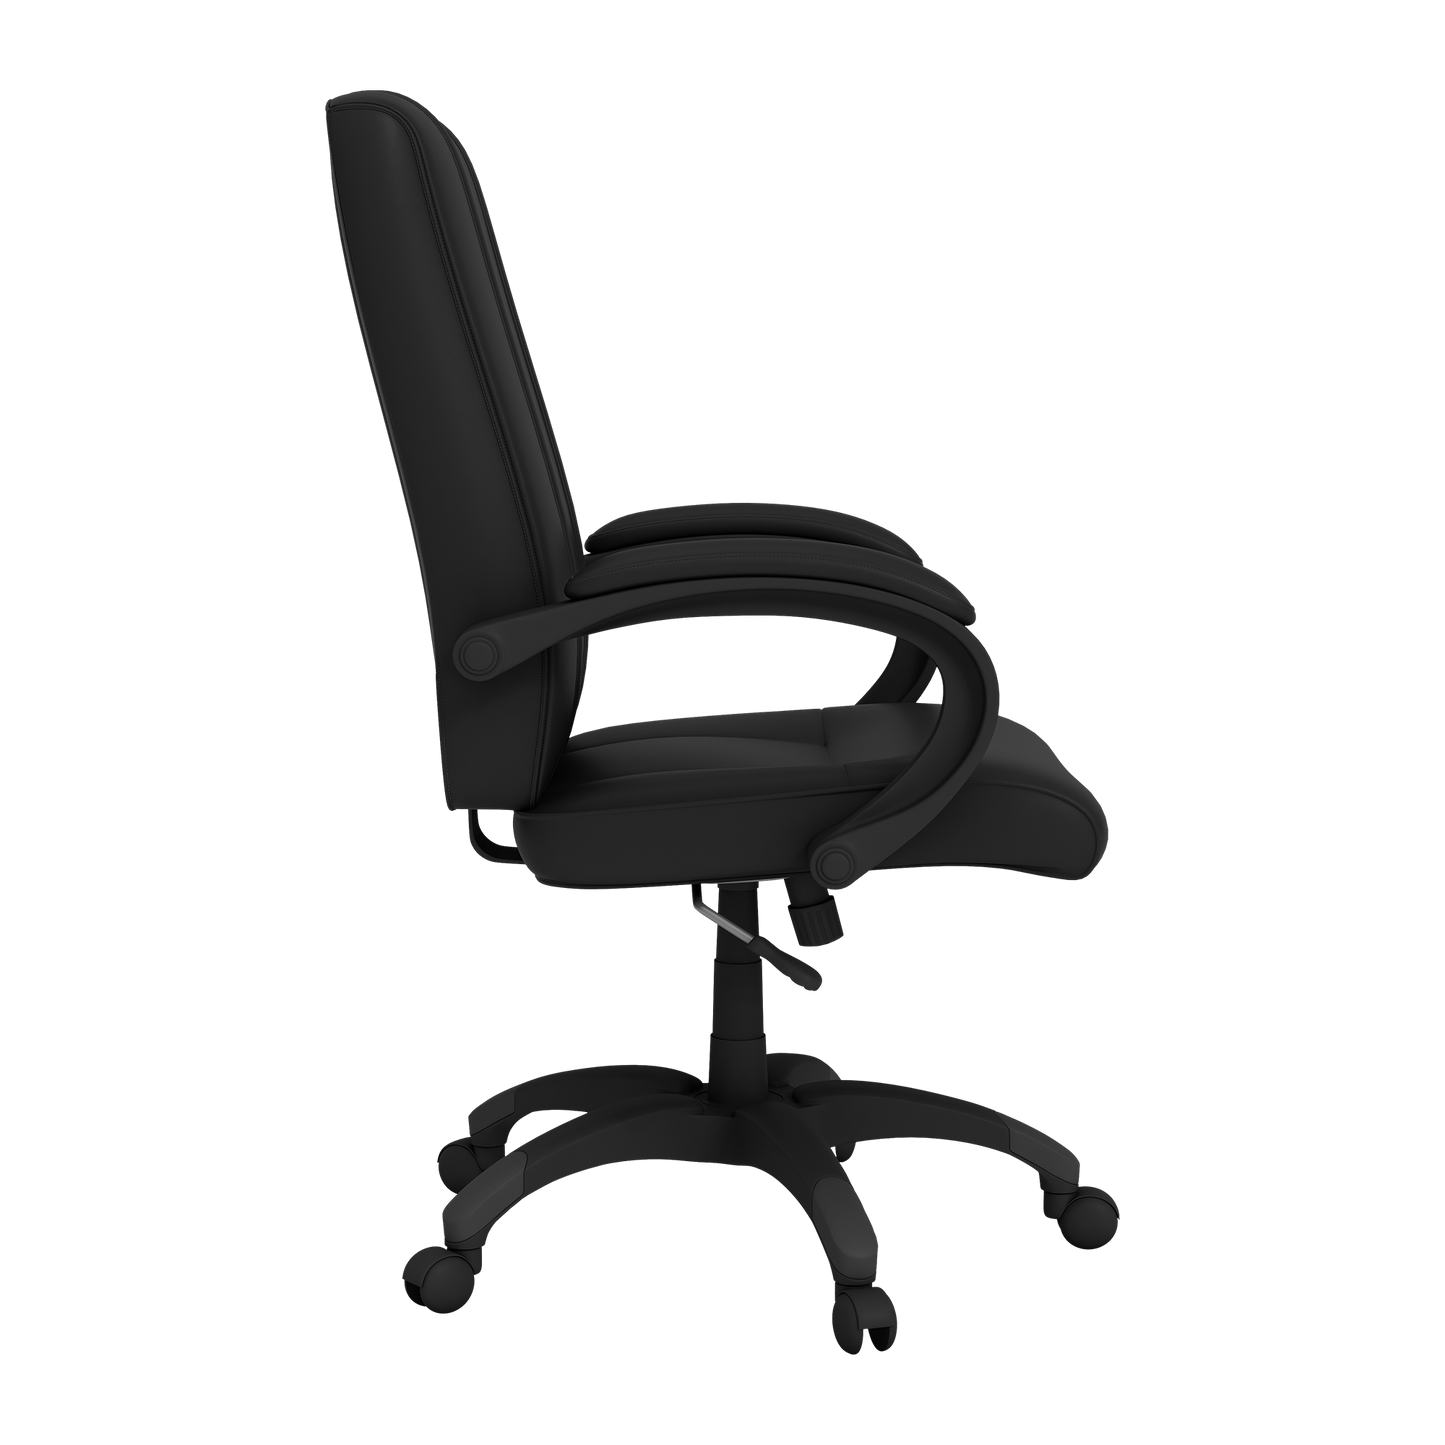 Office Chair 1000 with Charlotte Hornets Secondary